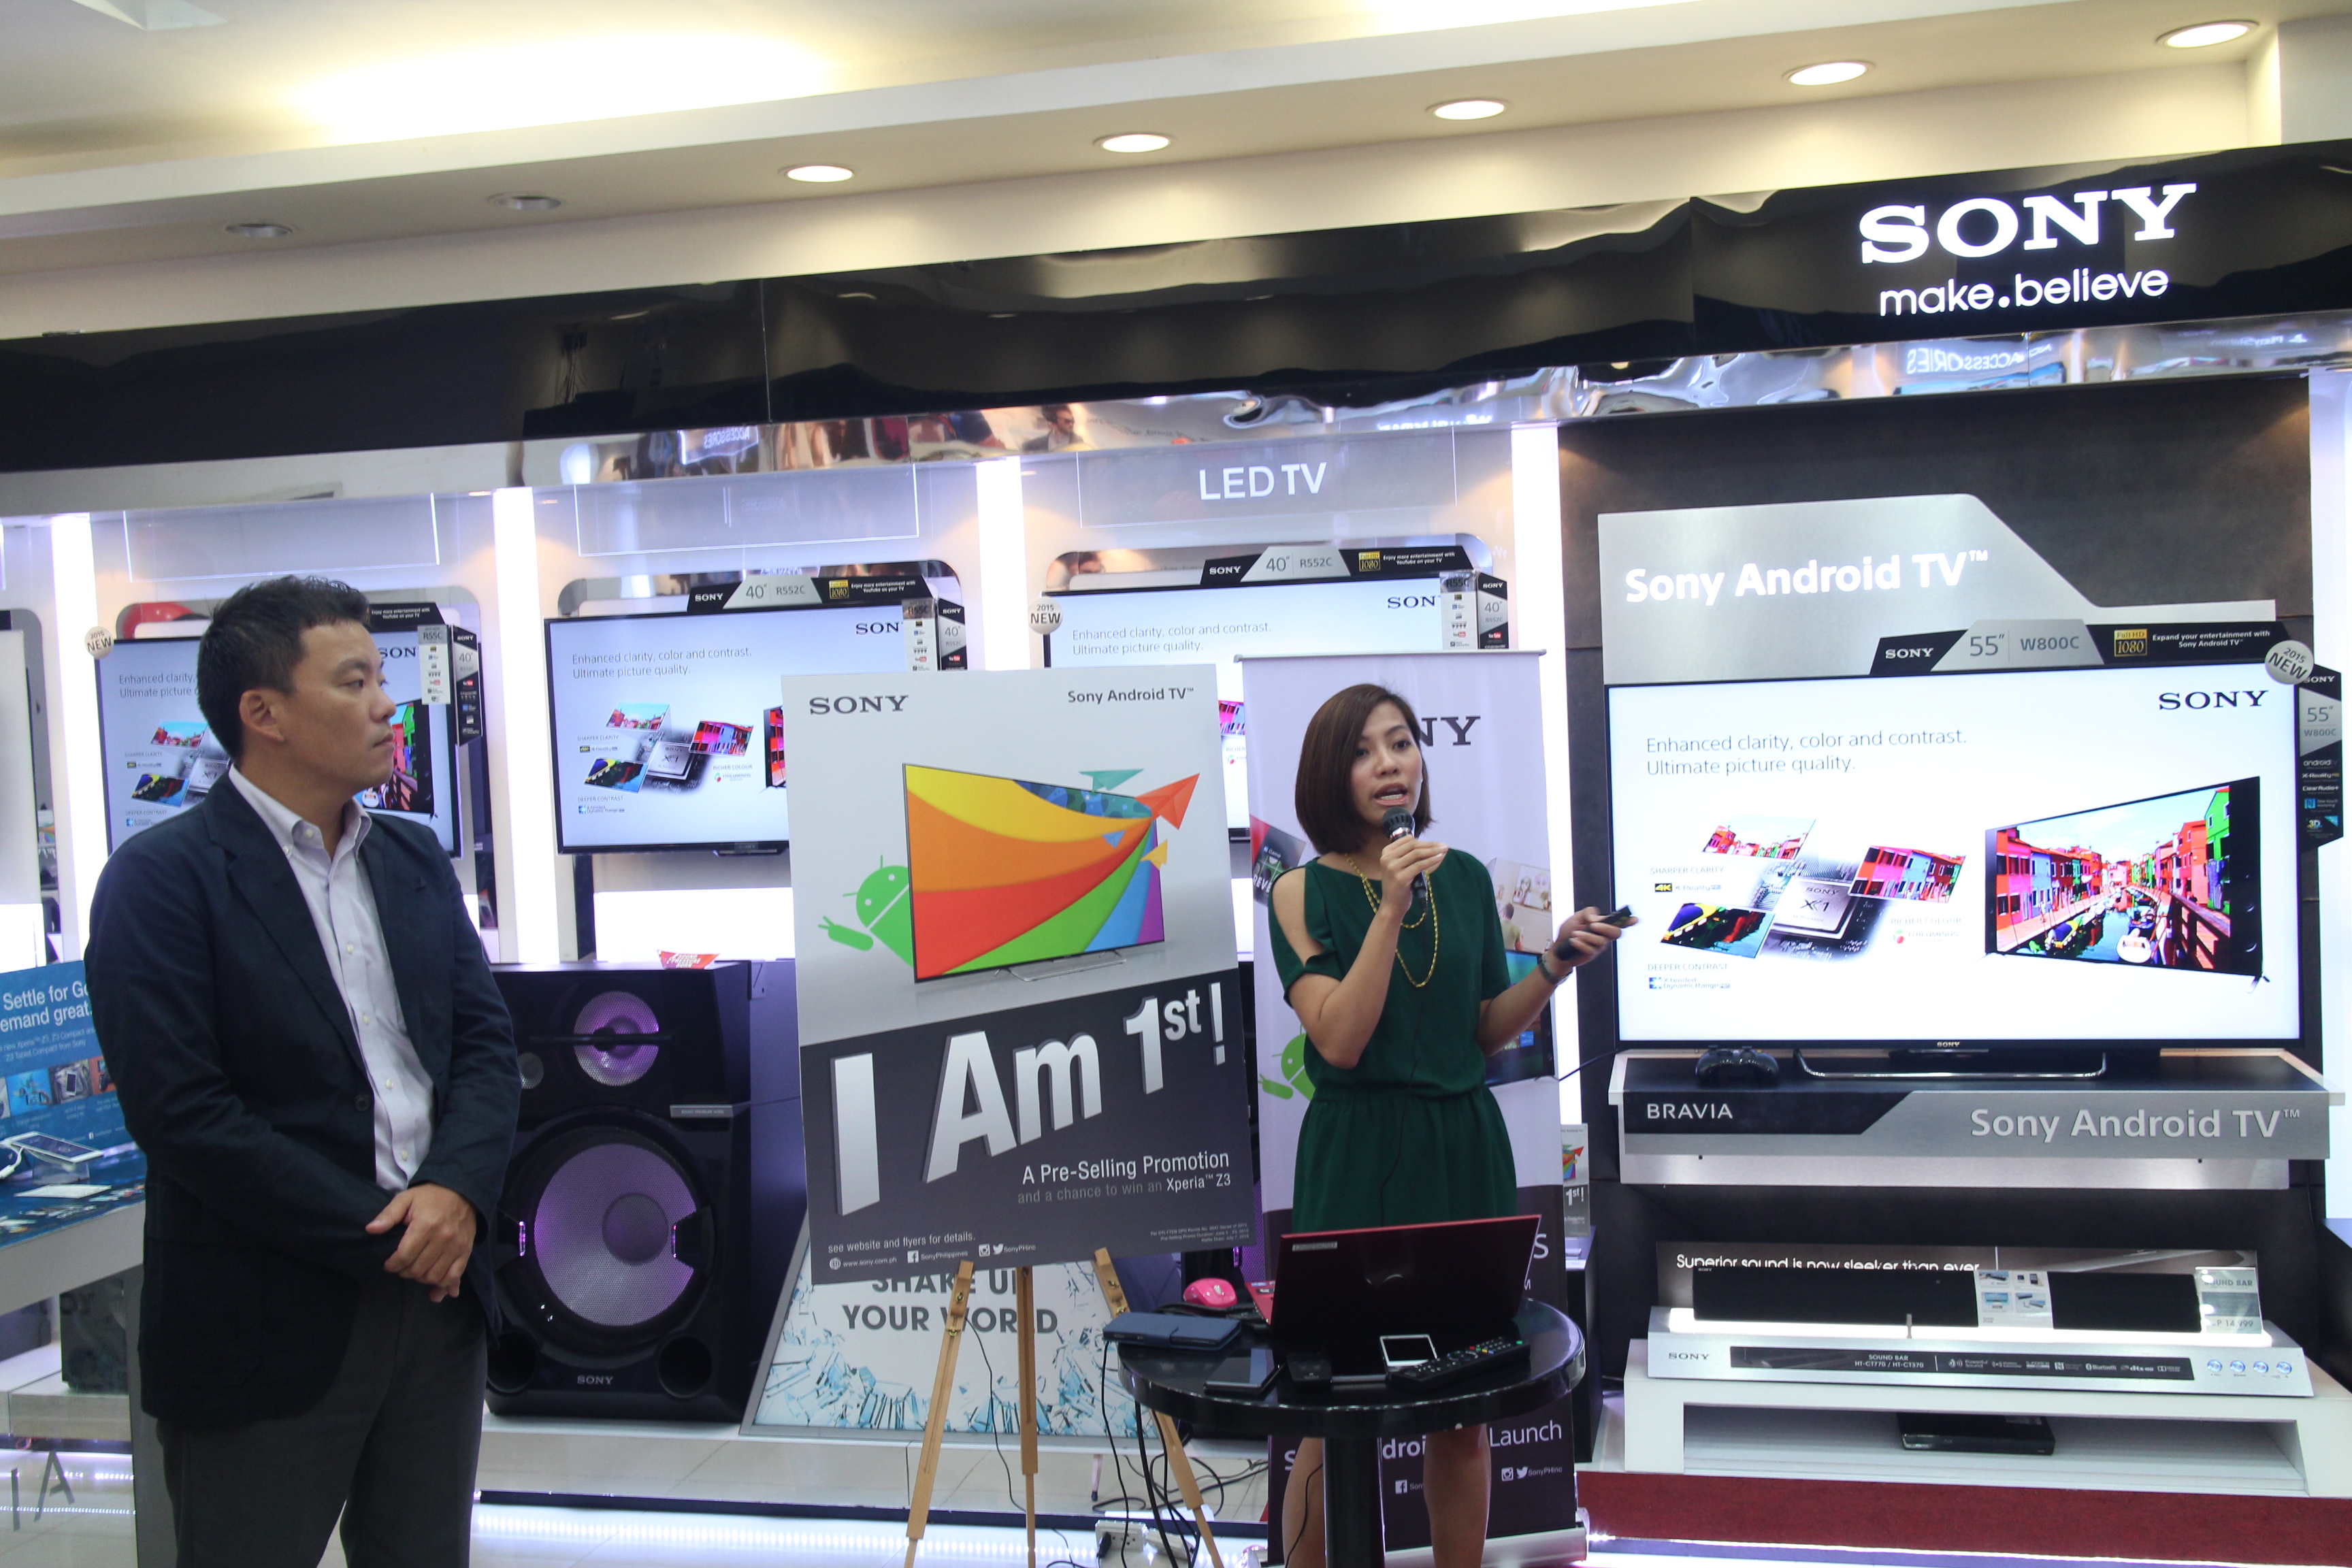 Meet the new Sony Bravia TVs powered by Android